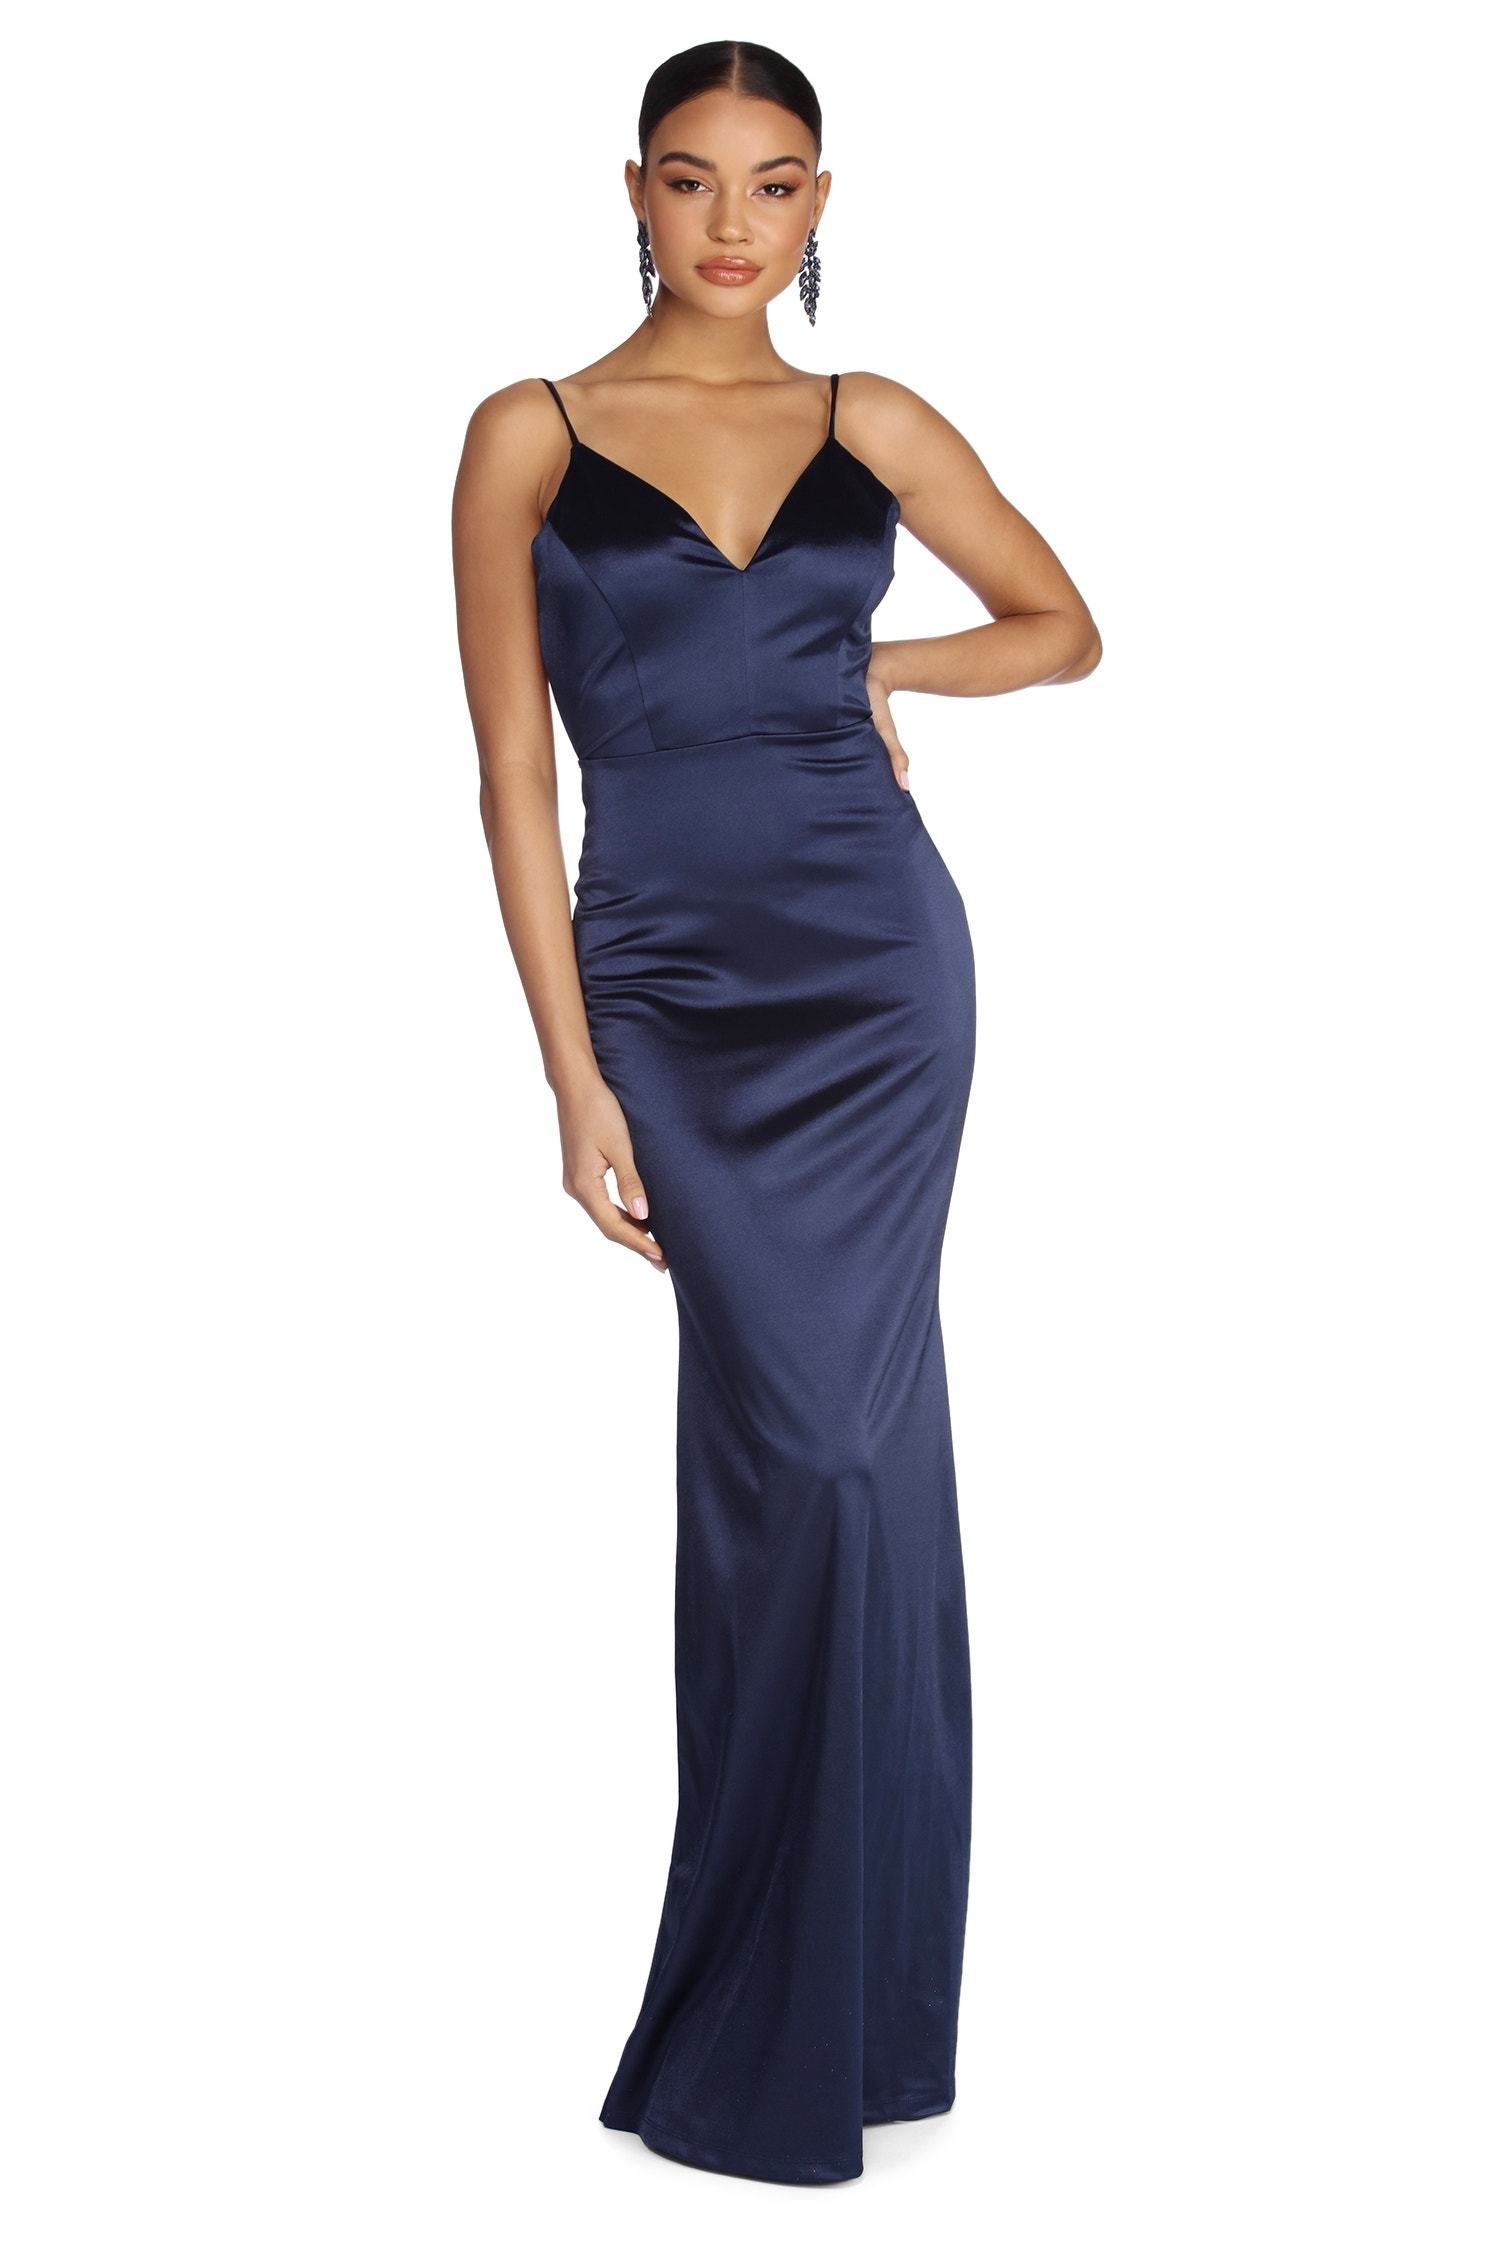 Aria Formal Satin Ruched Dress